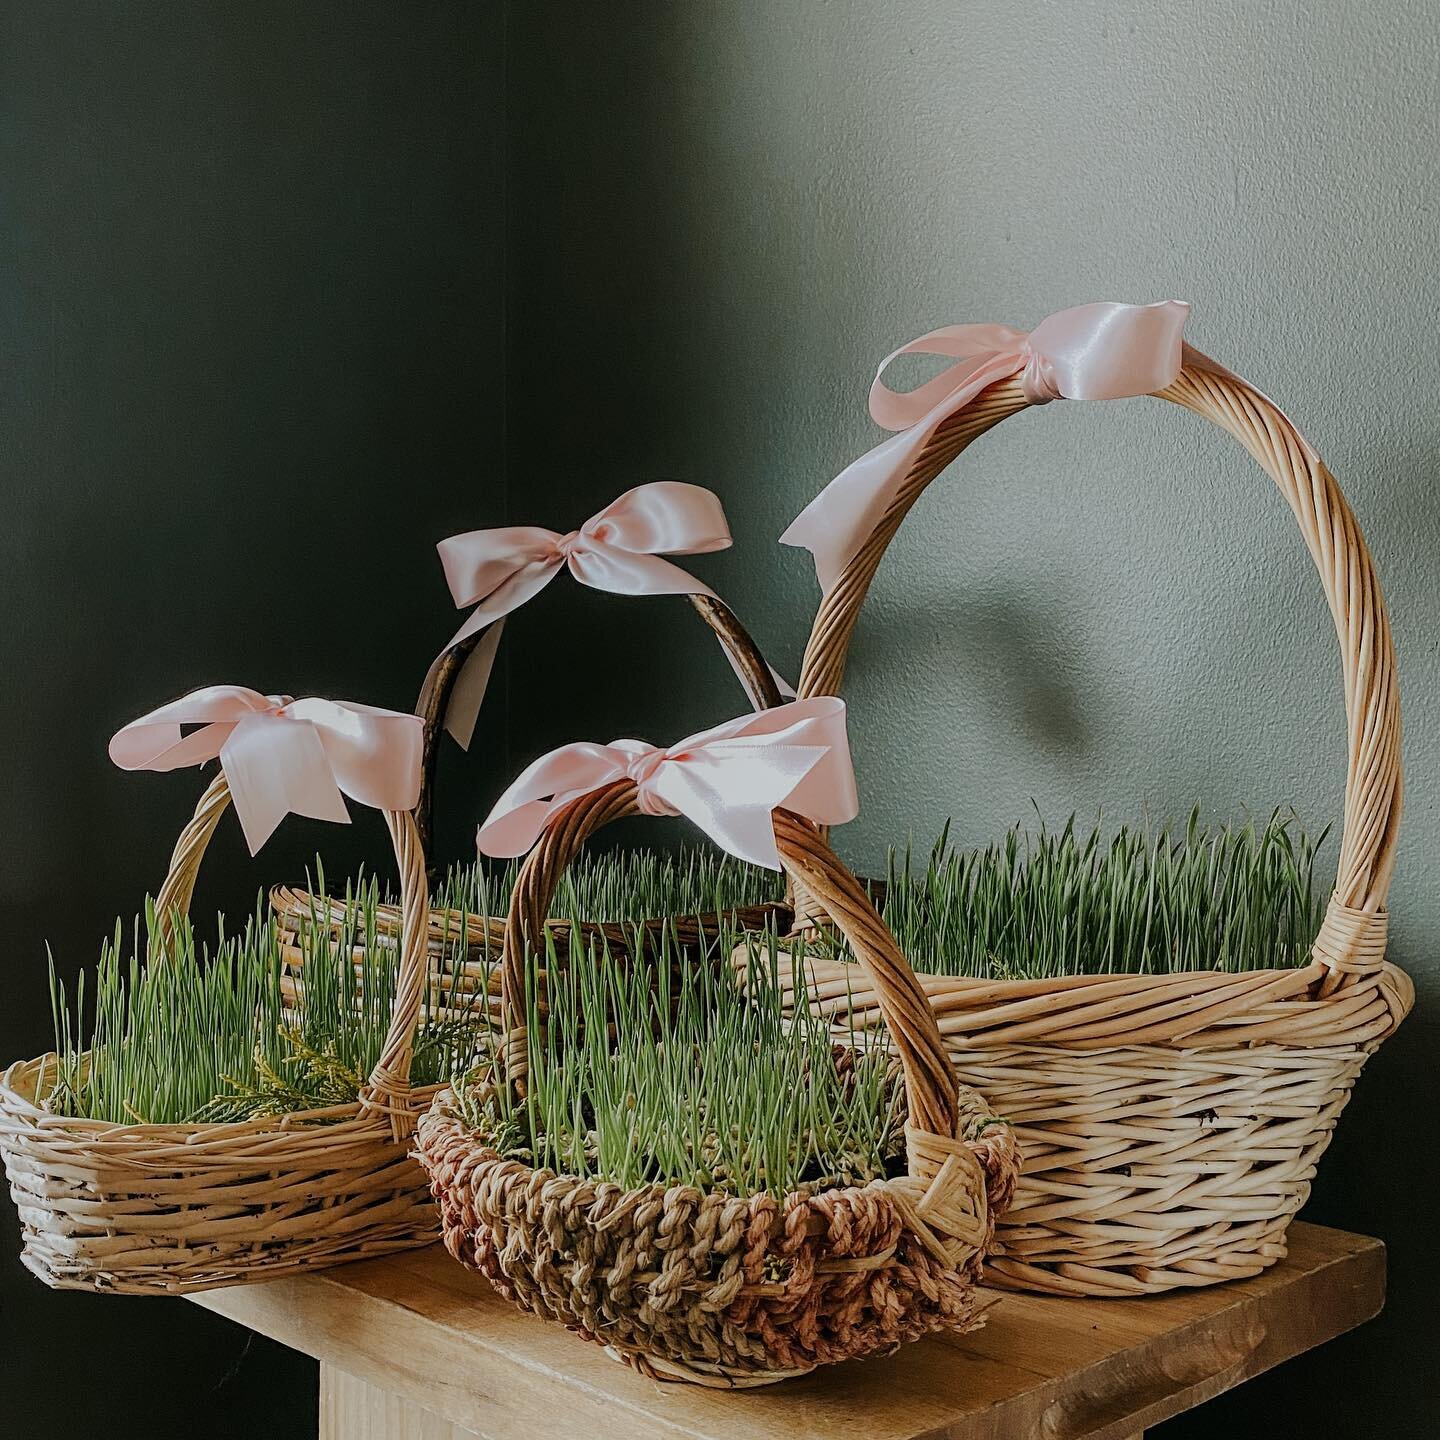 Darling Easter baskets full of fresh wheatgrass to nestle your beautifully dyed eggs in!

✨🐰🌱

2 sizes available for pick-up and local delivery all week!